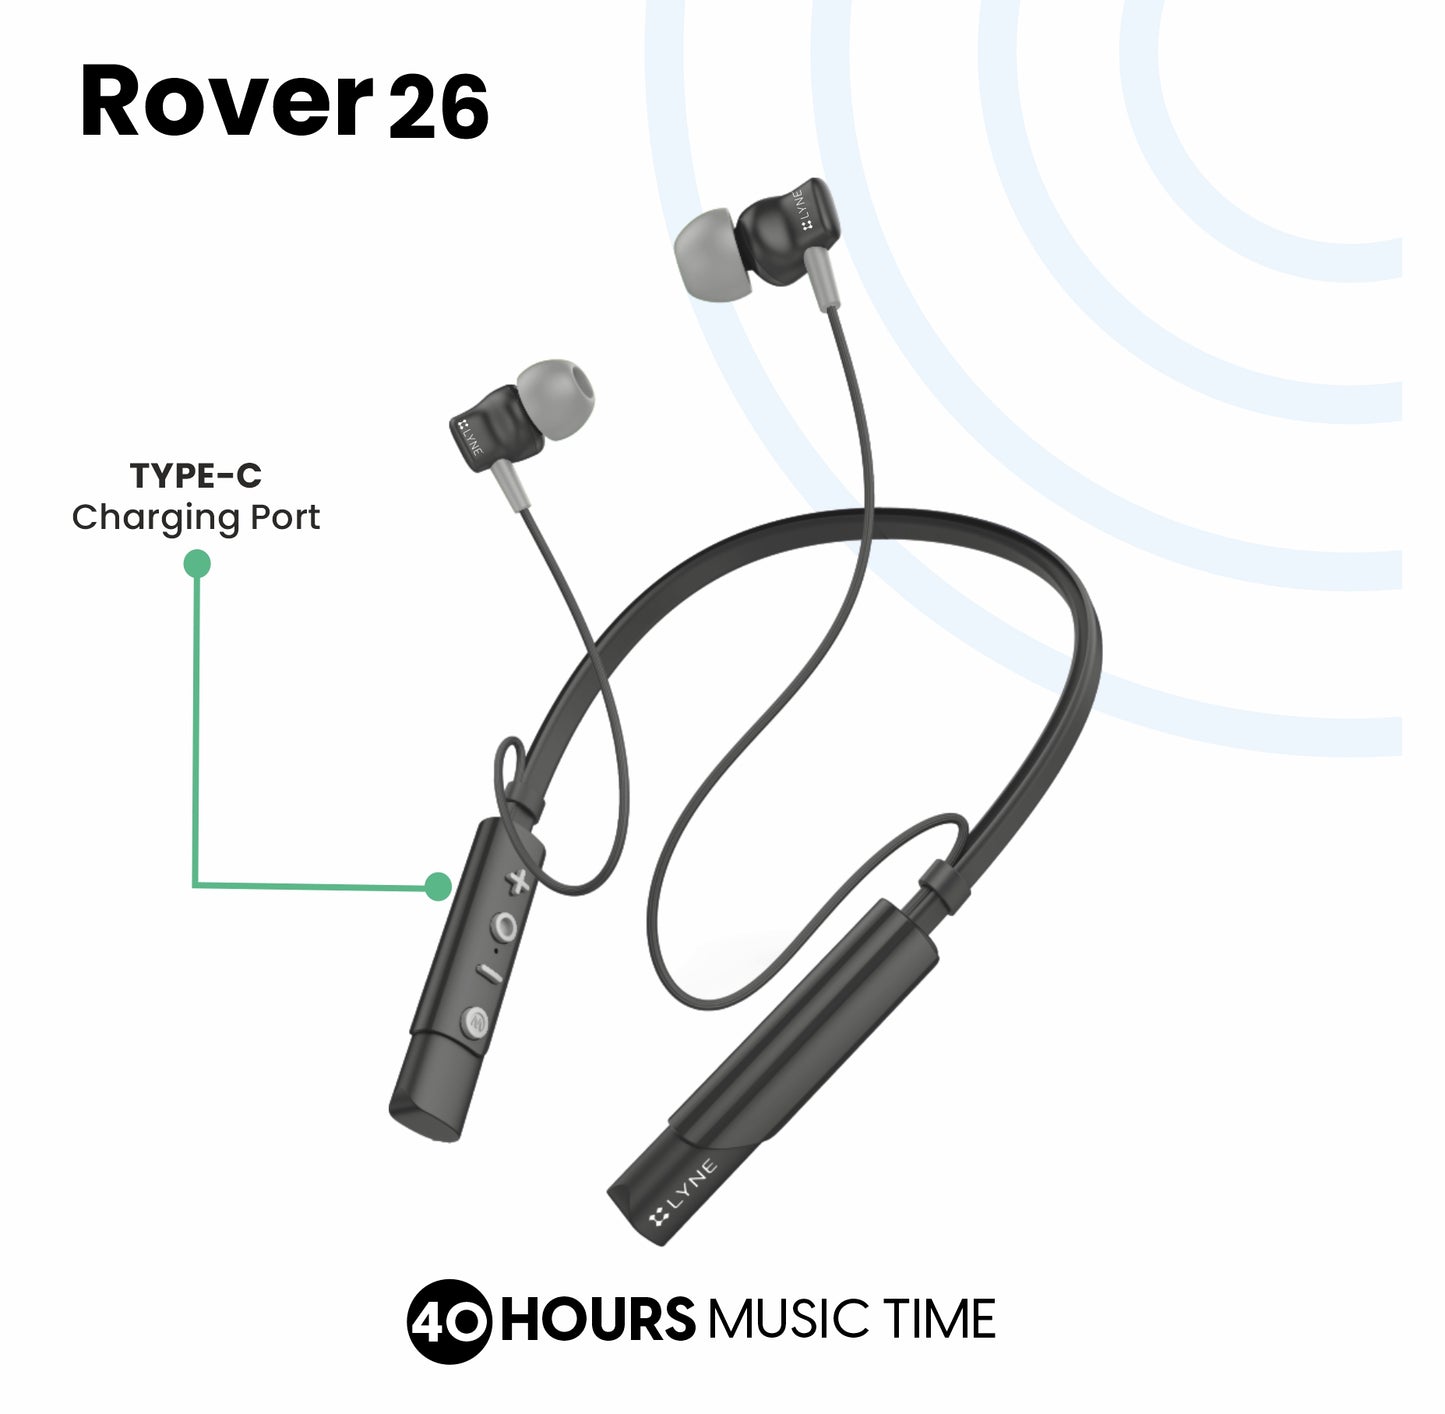 LYNE Rover 26 40 Hours Battery Backup Bluetooth Neckband with Magnetic Earbuds